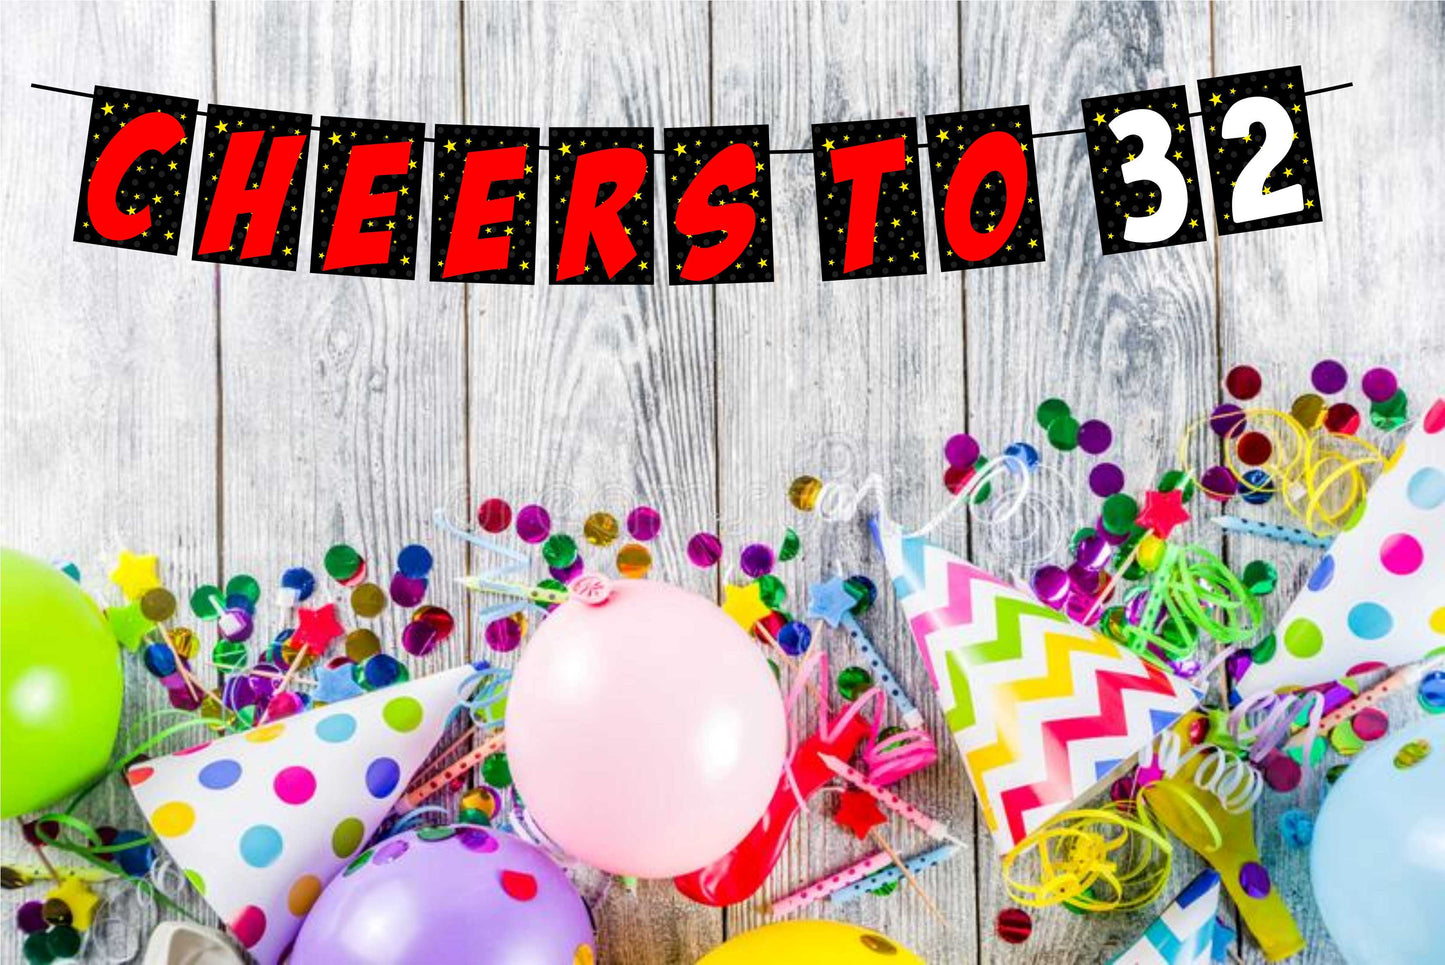 Cheers to 32 Birthday Banner for Photo Shoot Backdrop and Theme Party